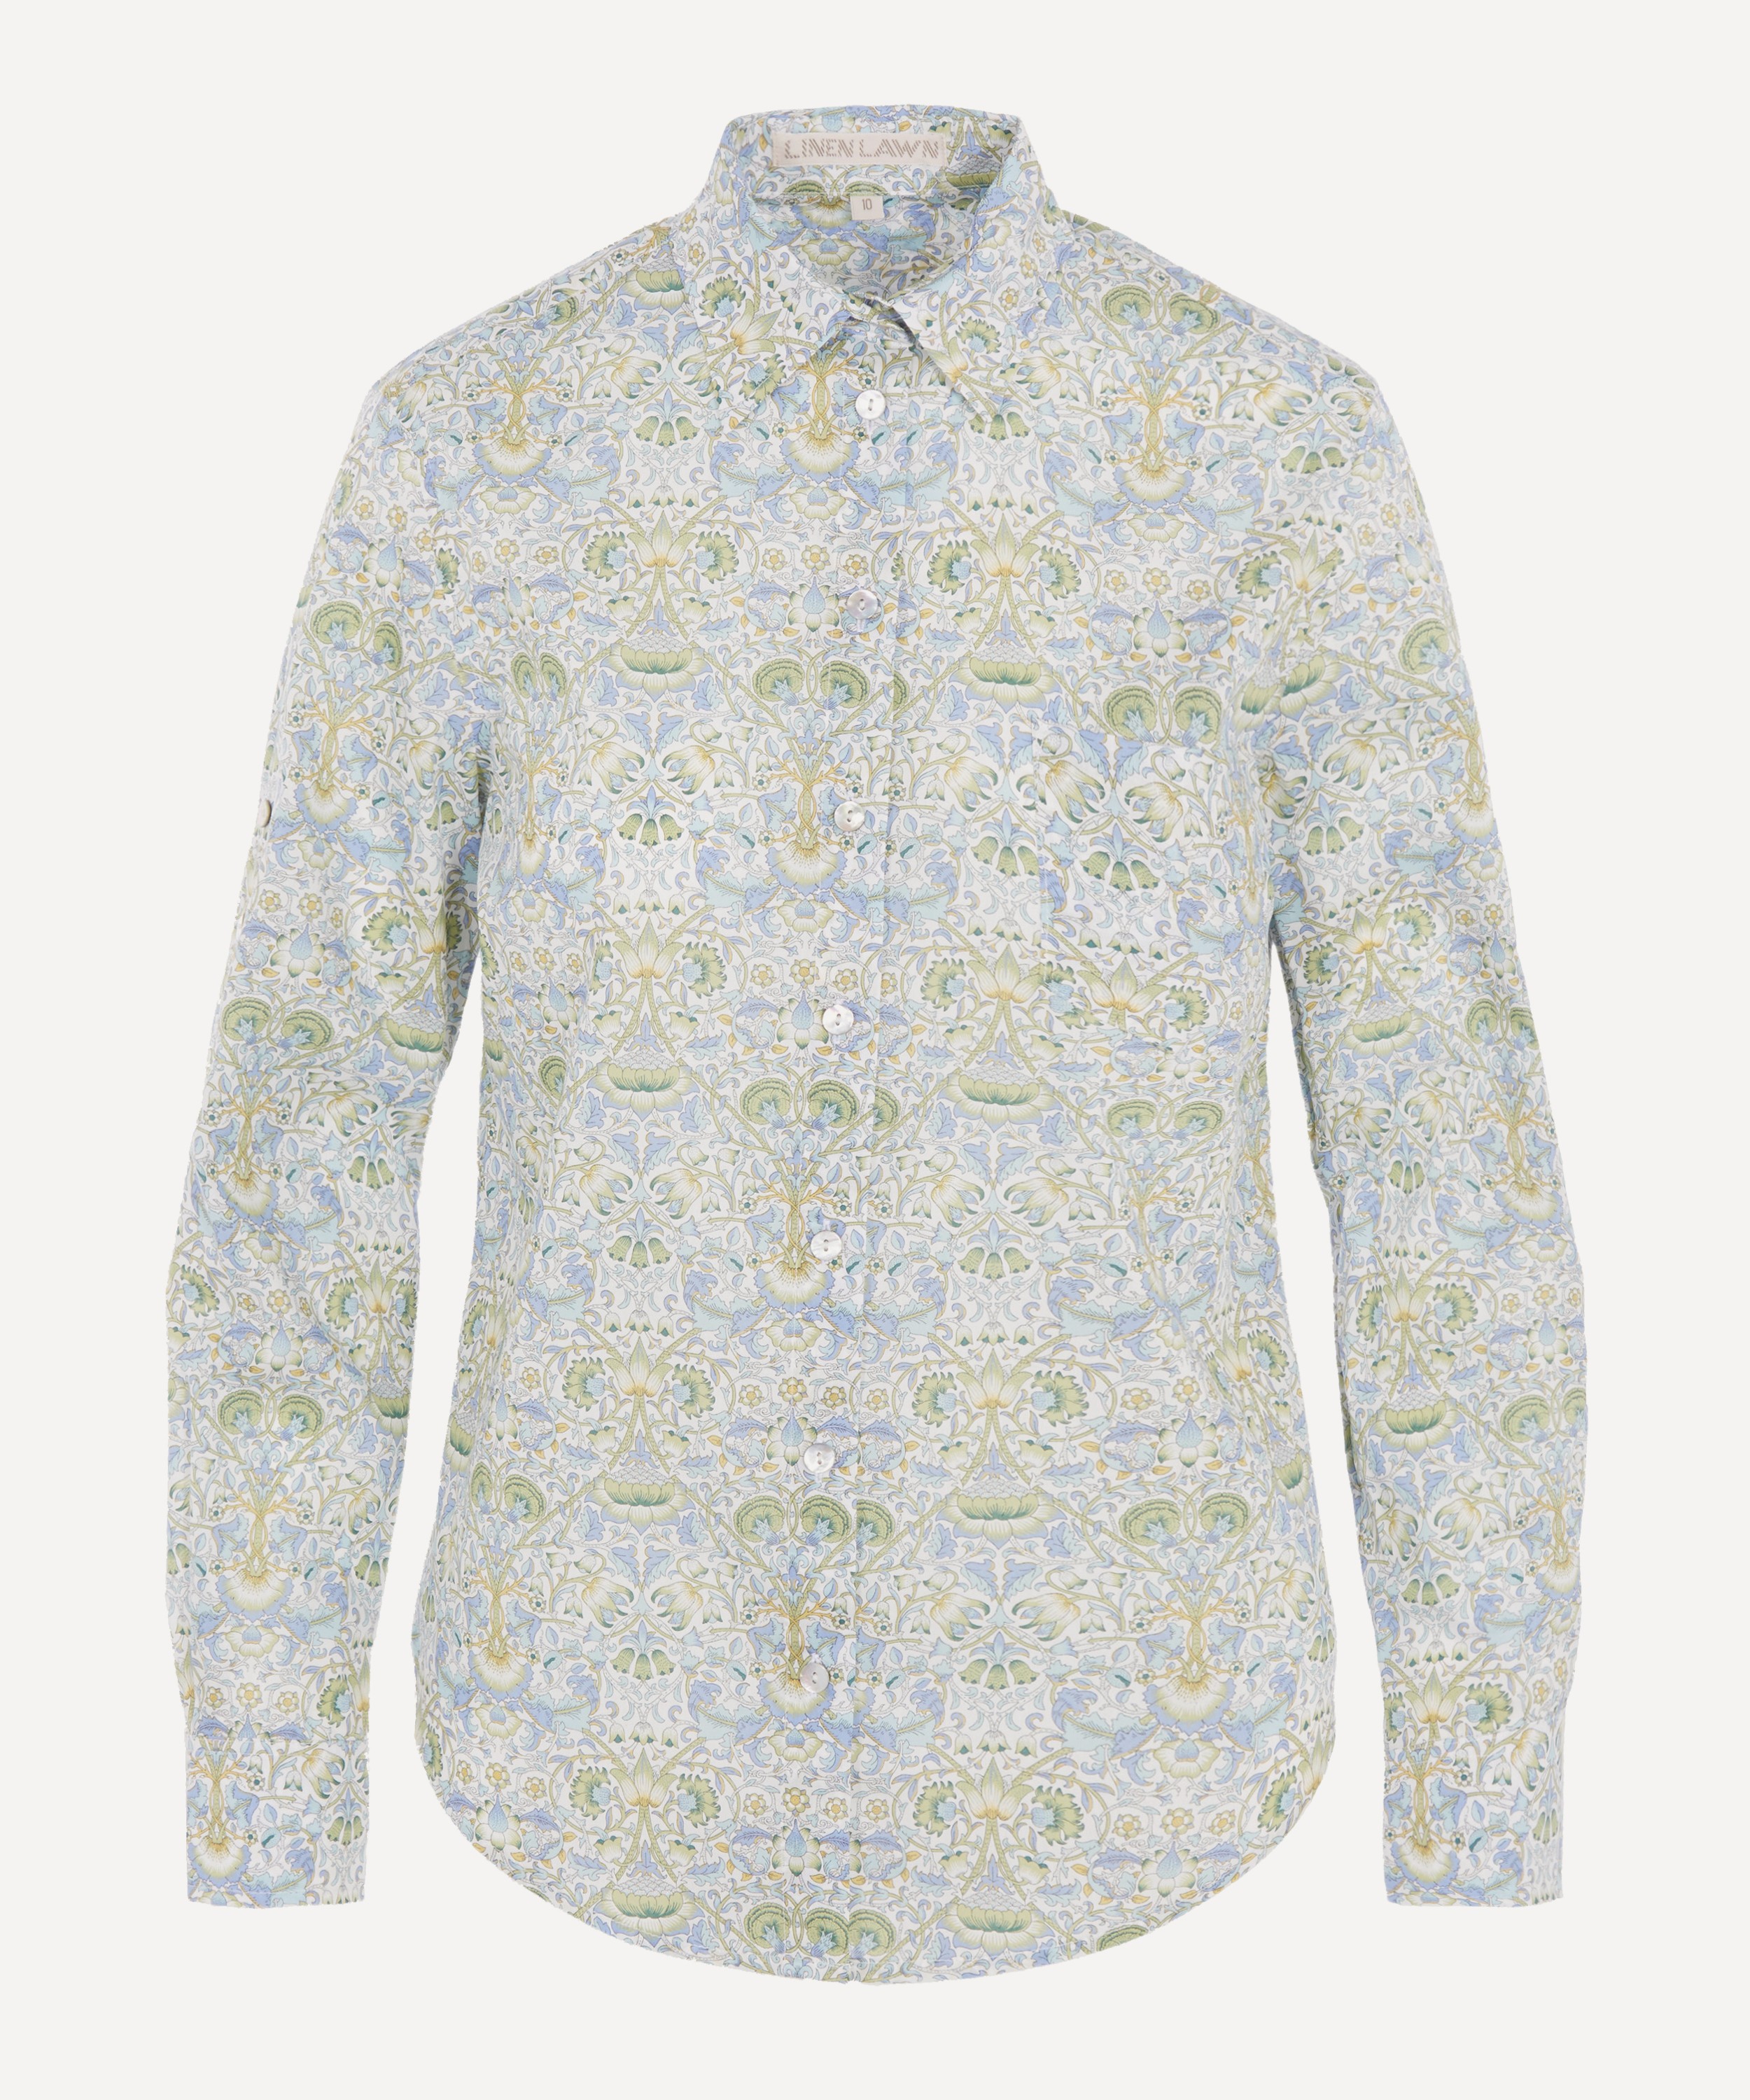 Liberty - Lodden Tana Lawn™ Cotton Bryony Shirt image number null